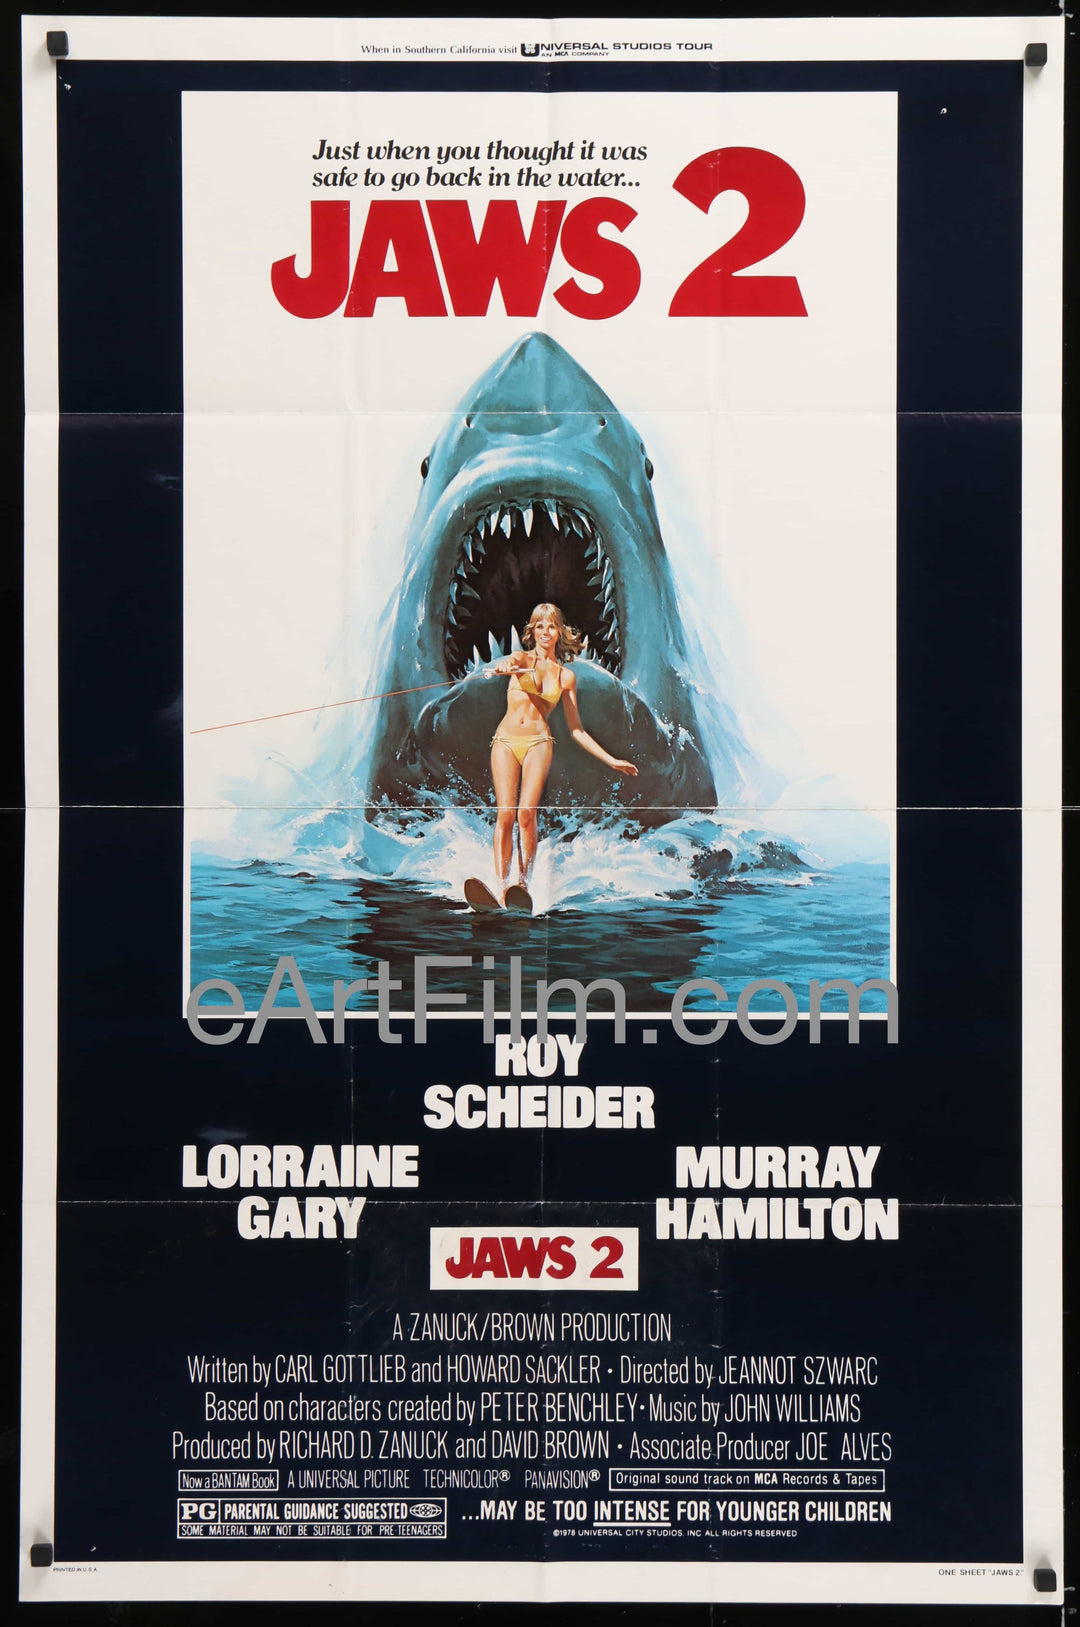 jaws movie attack